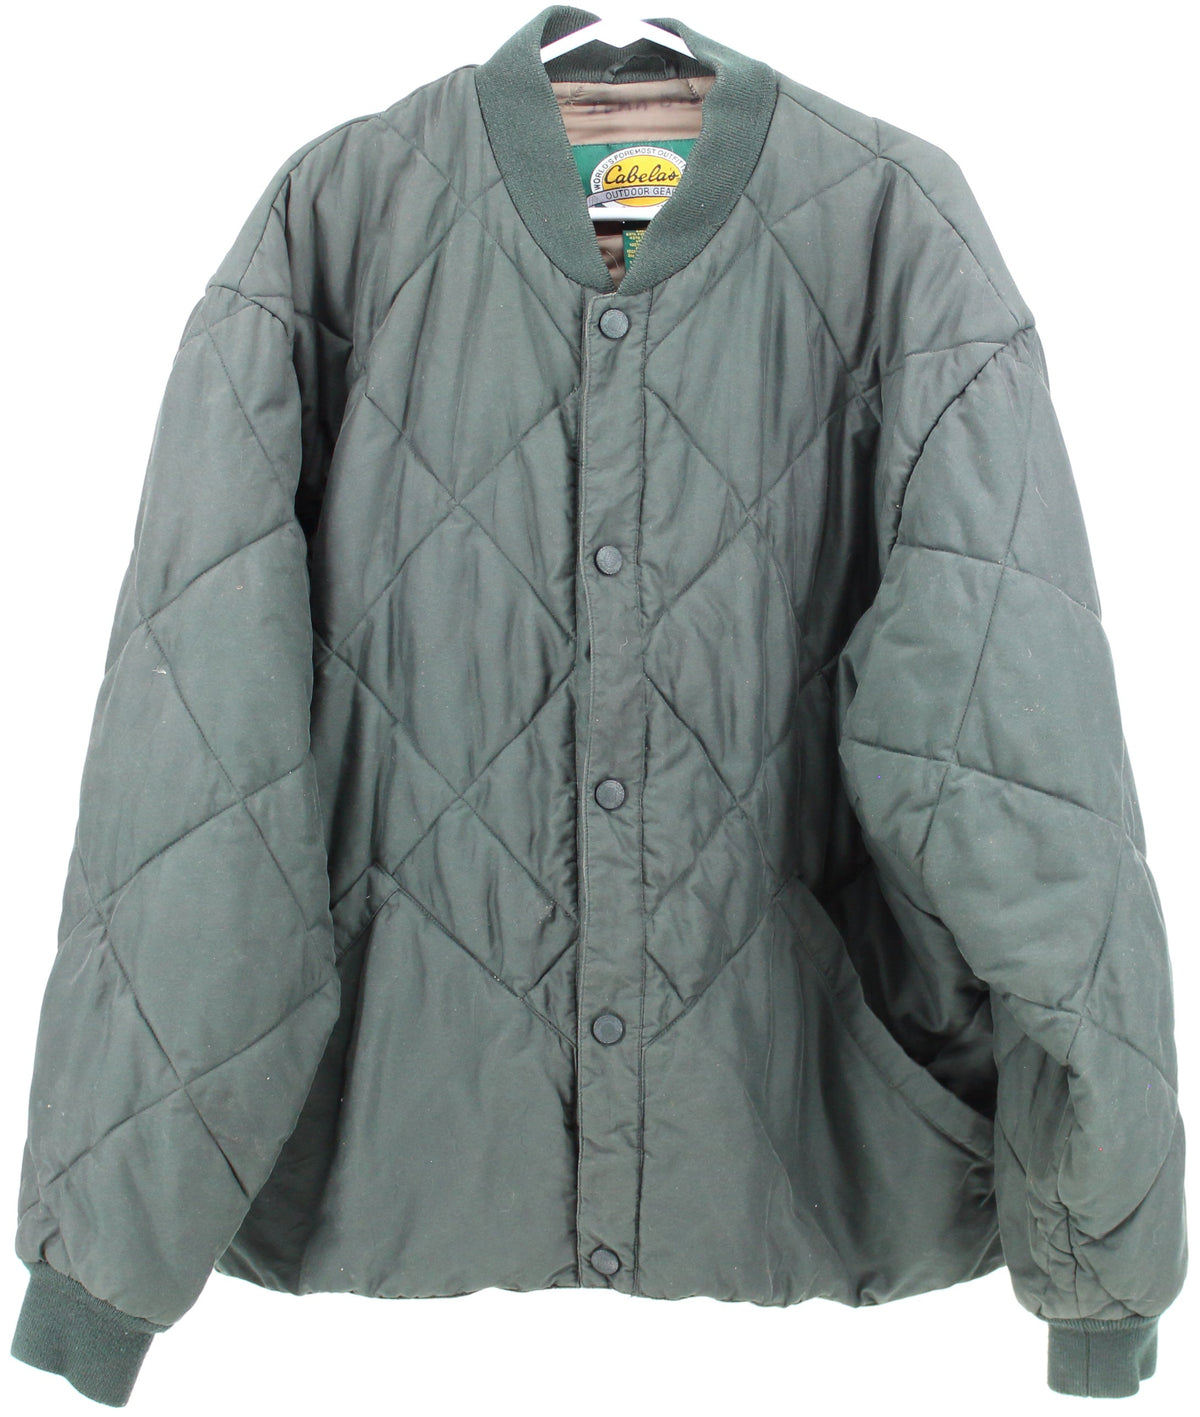 Cabela's Green Quilted Bomber Jacket